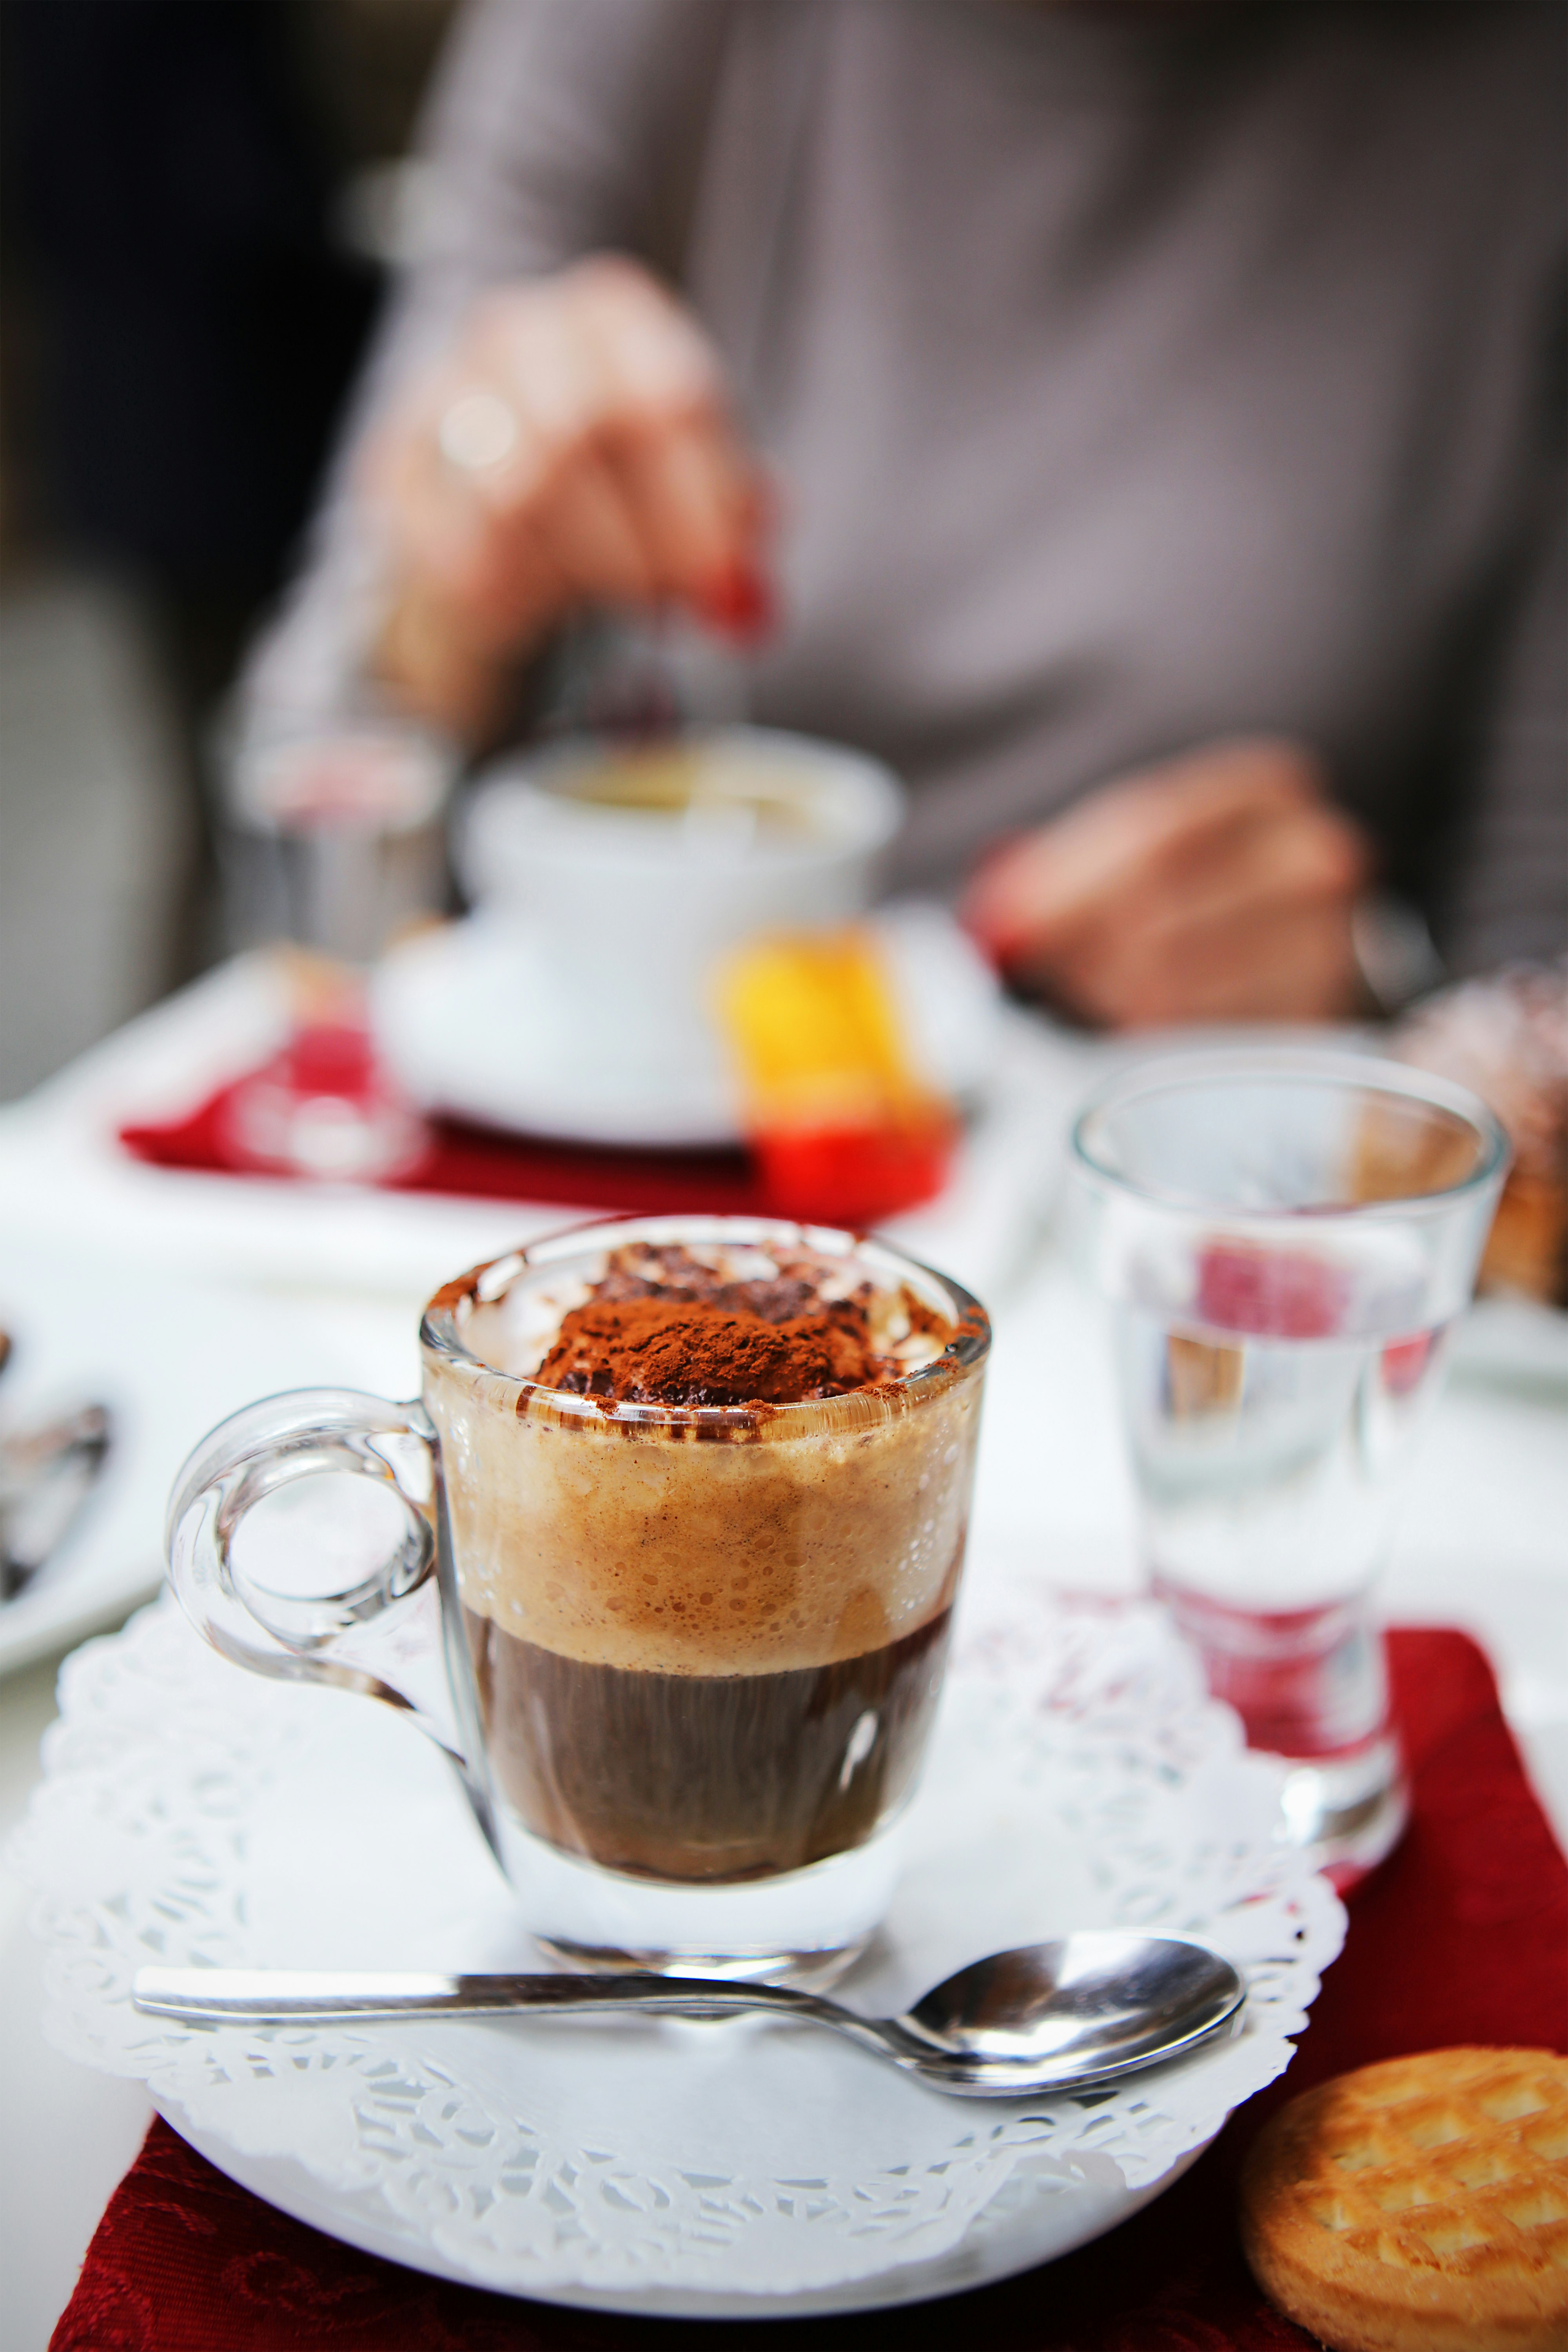 A close up shot of a cappuccino served in a class cup with a handle, on a white paper doily. There is a person wearing red nail polish stirring another cup of coffee out of focus in the background. 